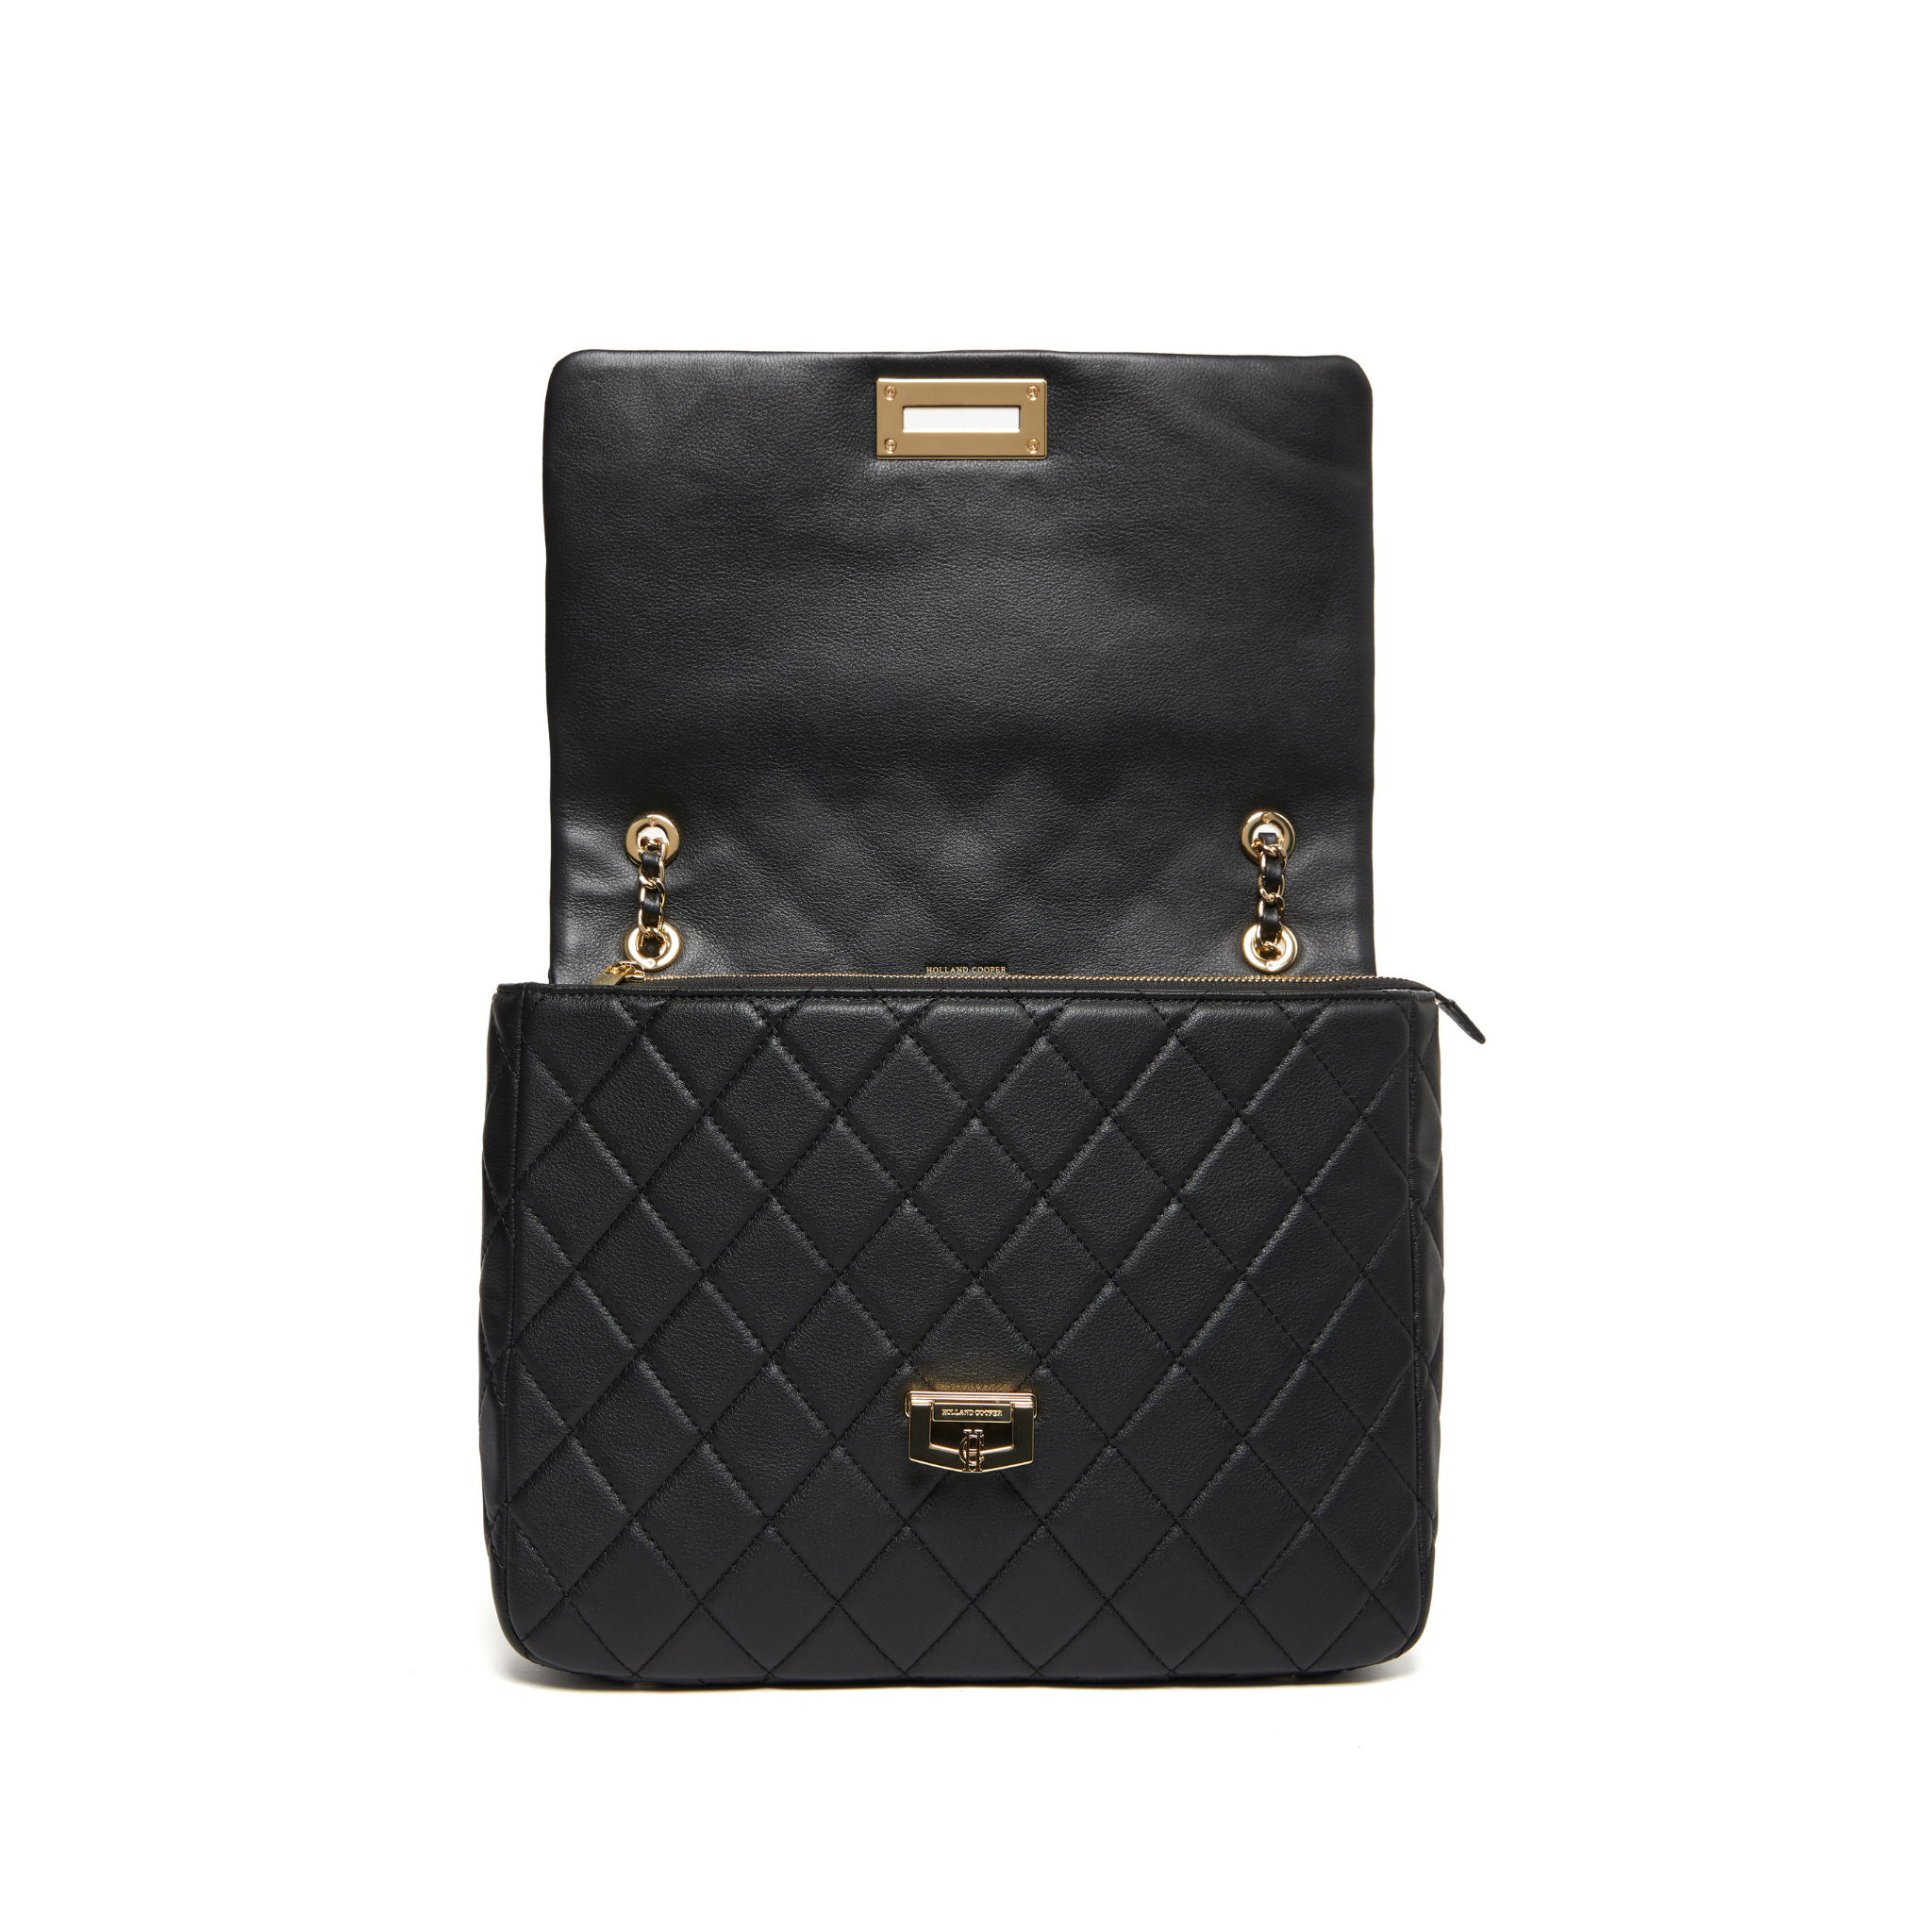 Quilted Soho Bag Black Leather